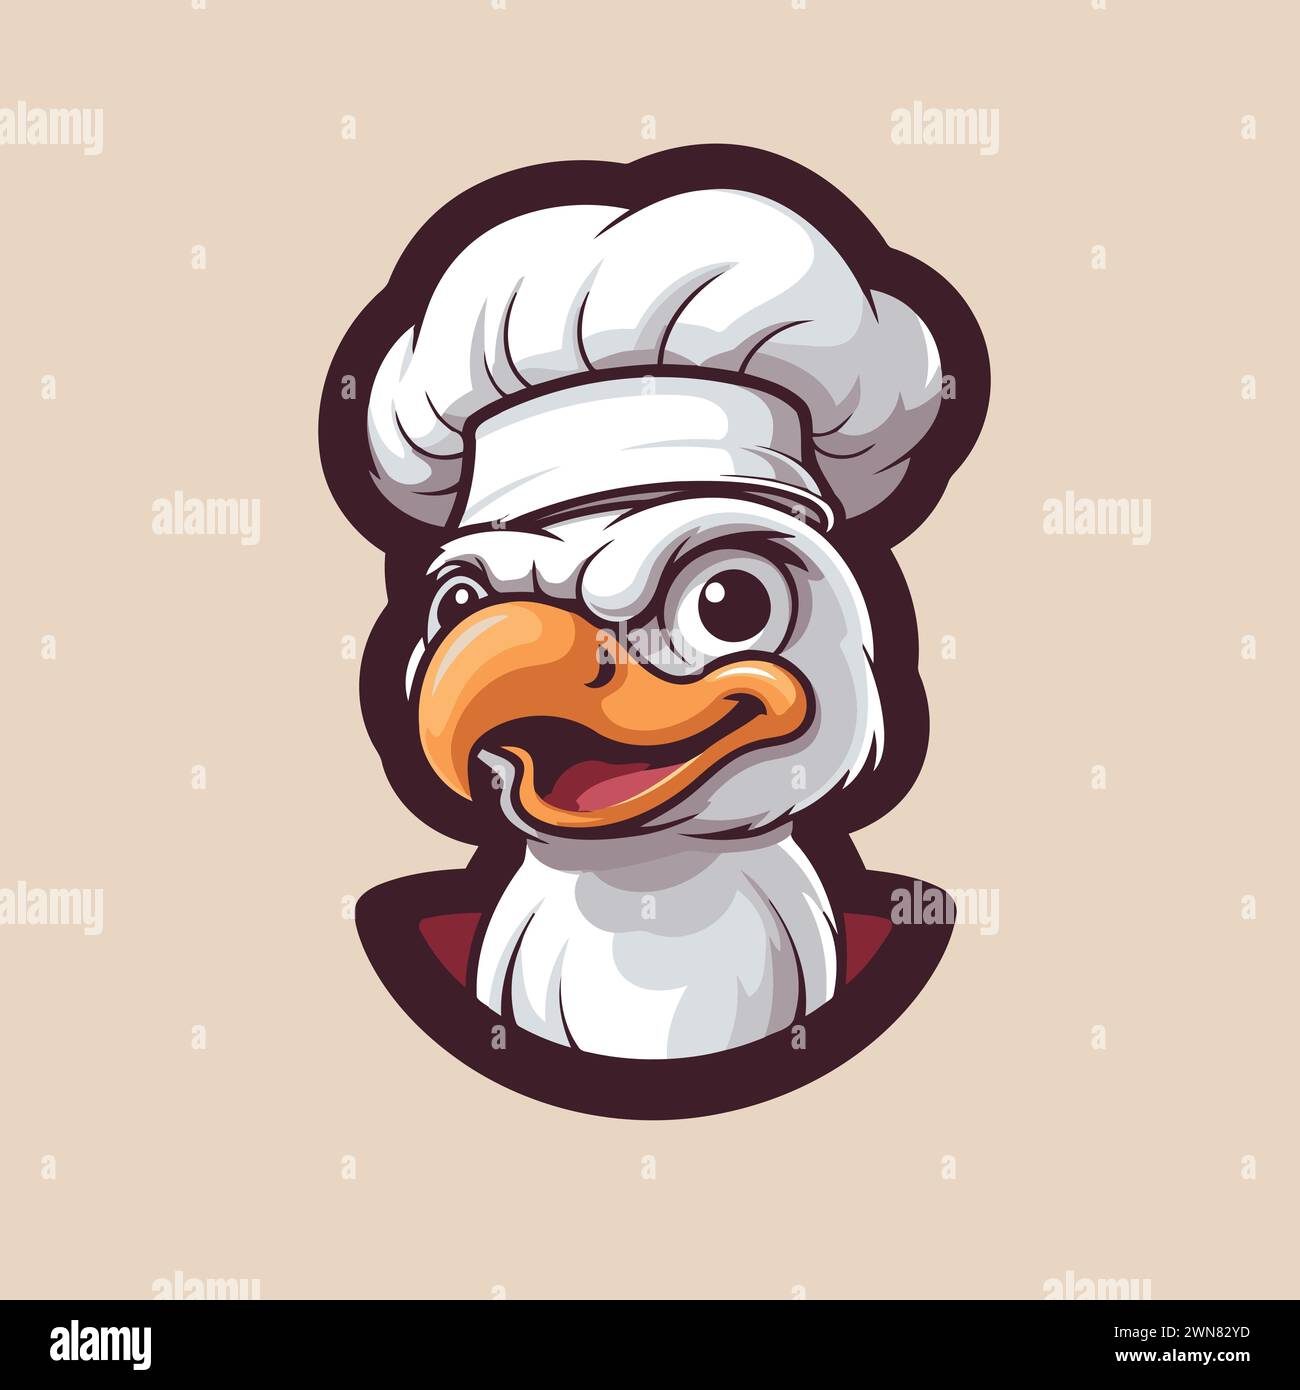 Eagle chef logo. Vector illustration of a bird wearing a chef hat. Stock Vector